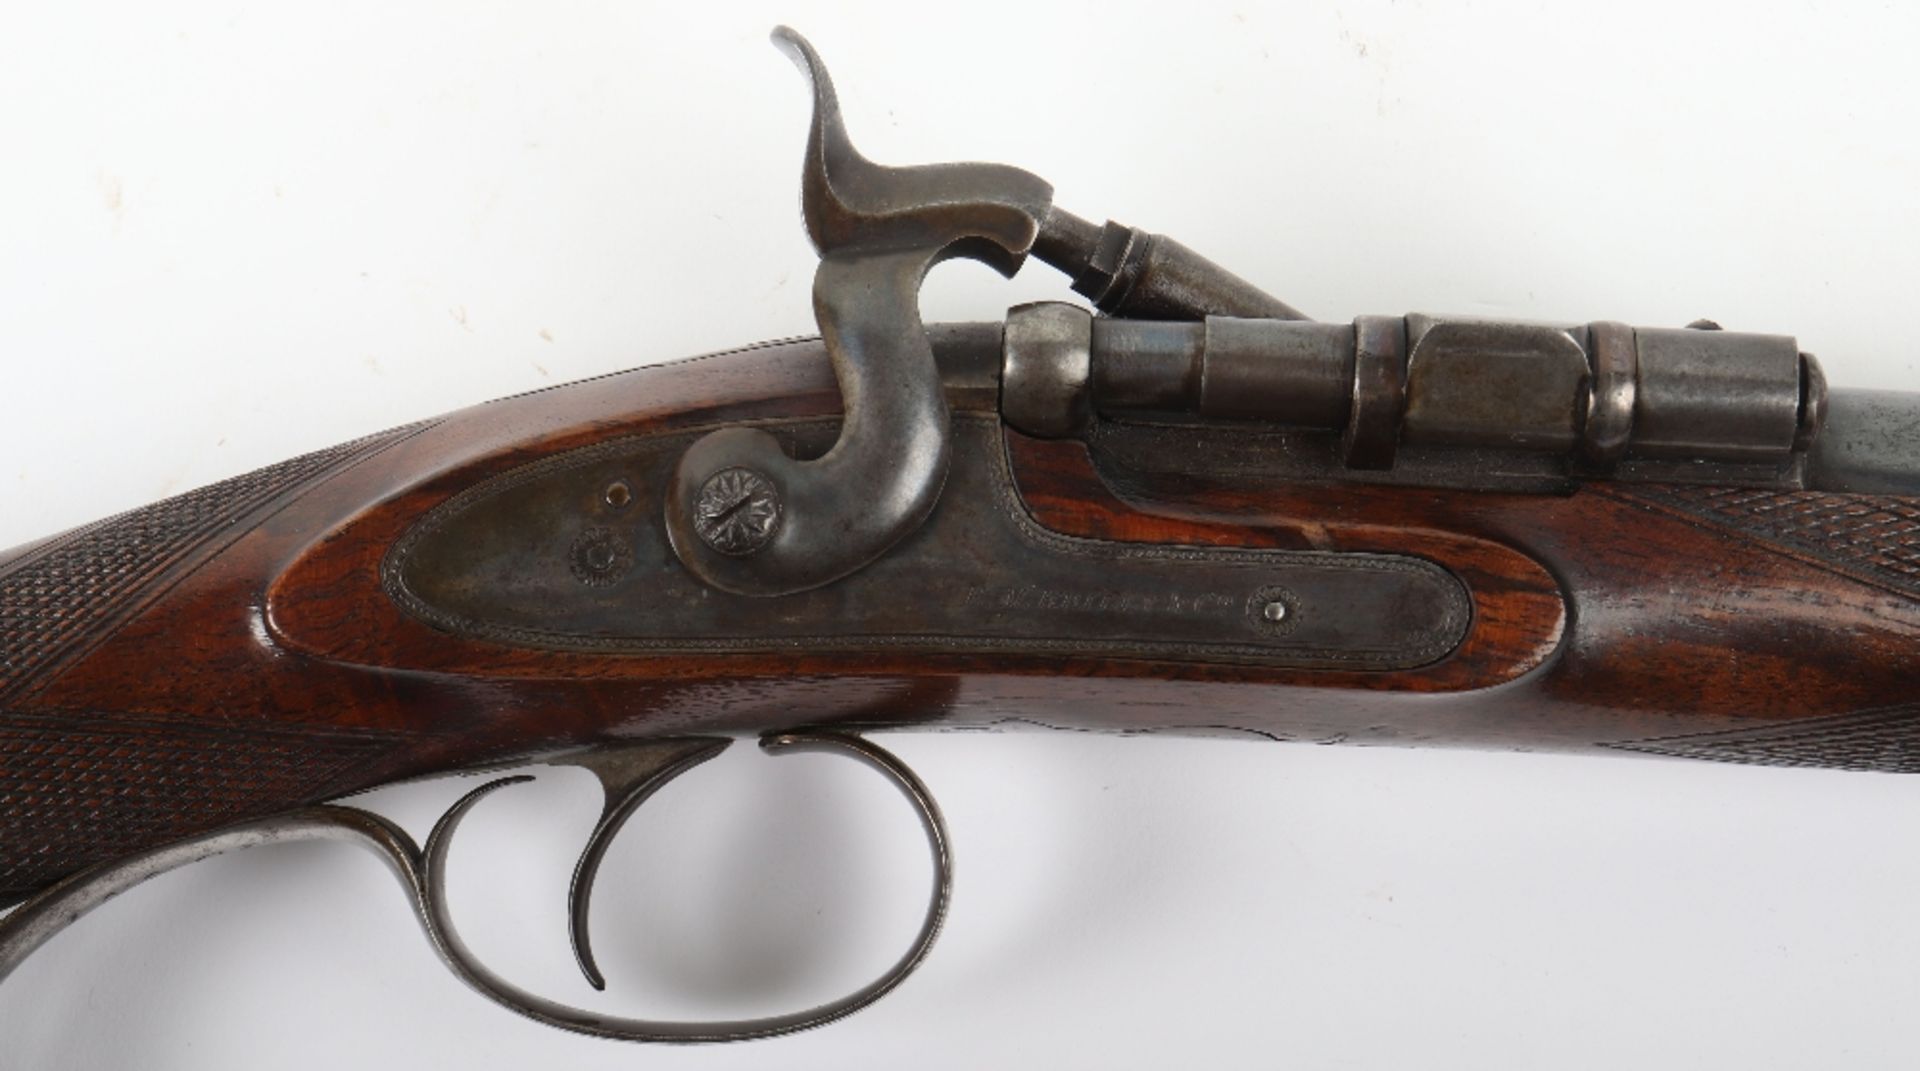 25-Bore Snider Action Breech Loading Sporting Rifle by Reilly No. 15227 - Image 2 of 14